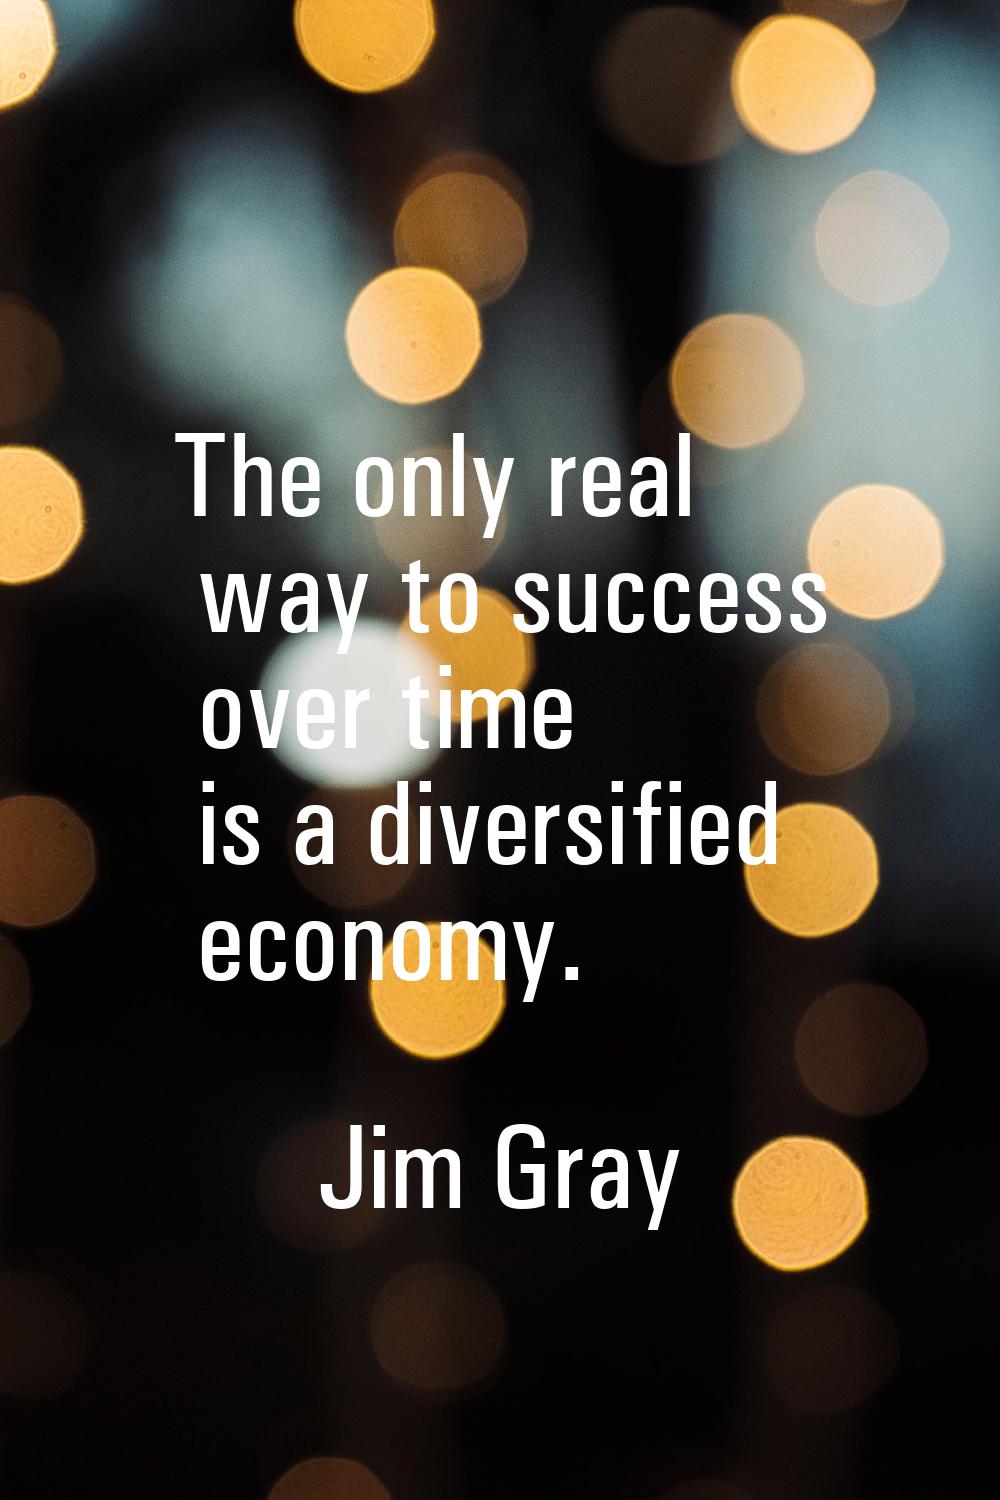 The only real way to success over time is a diversified economy.